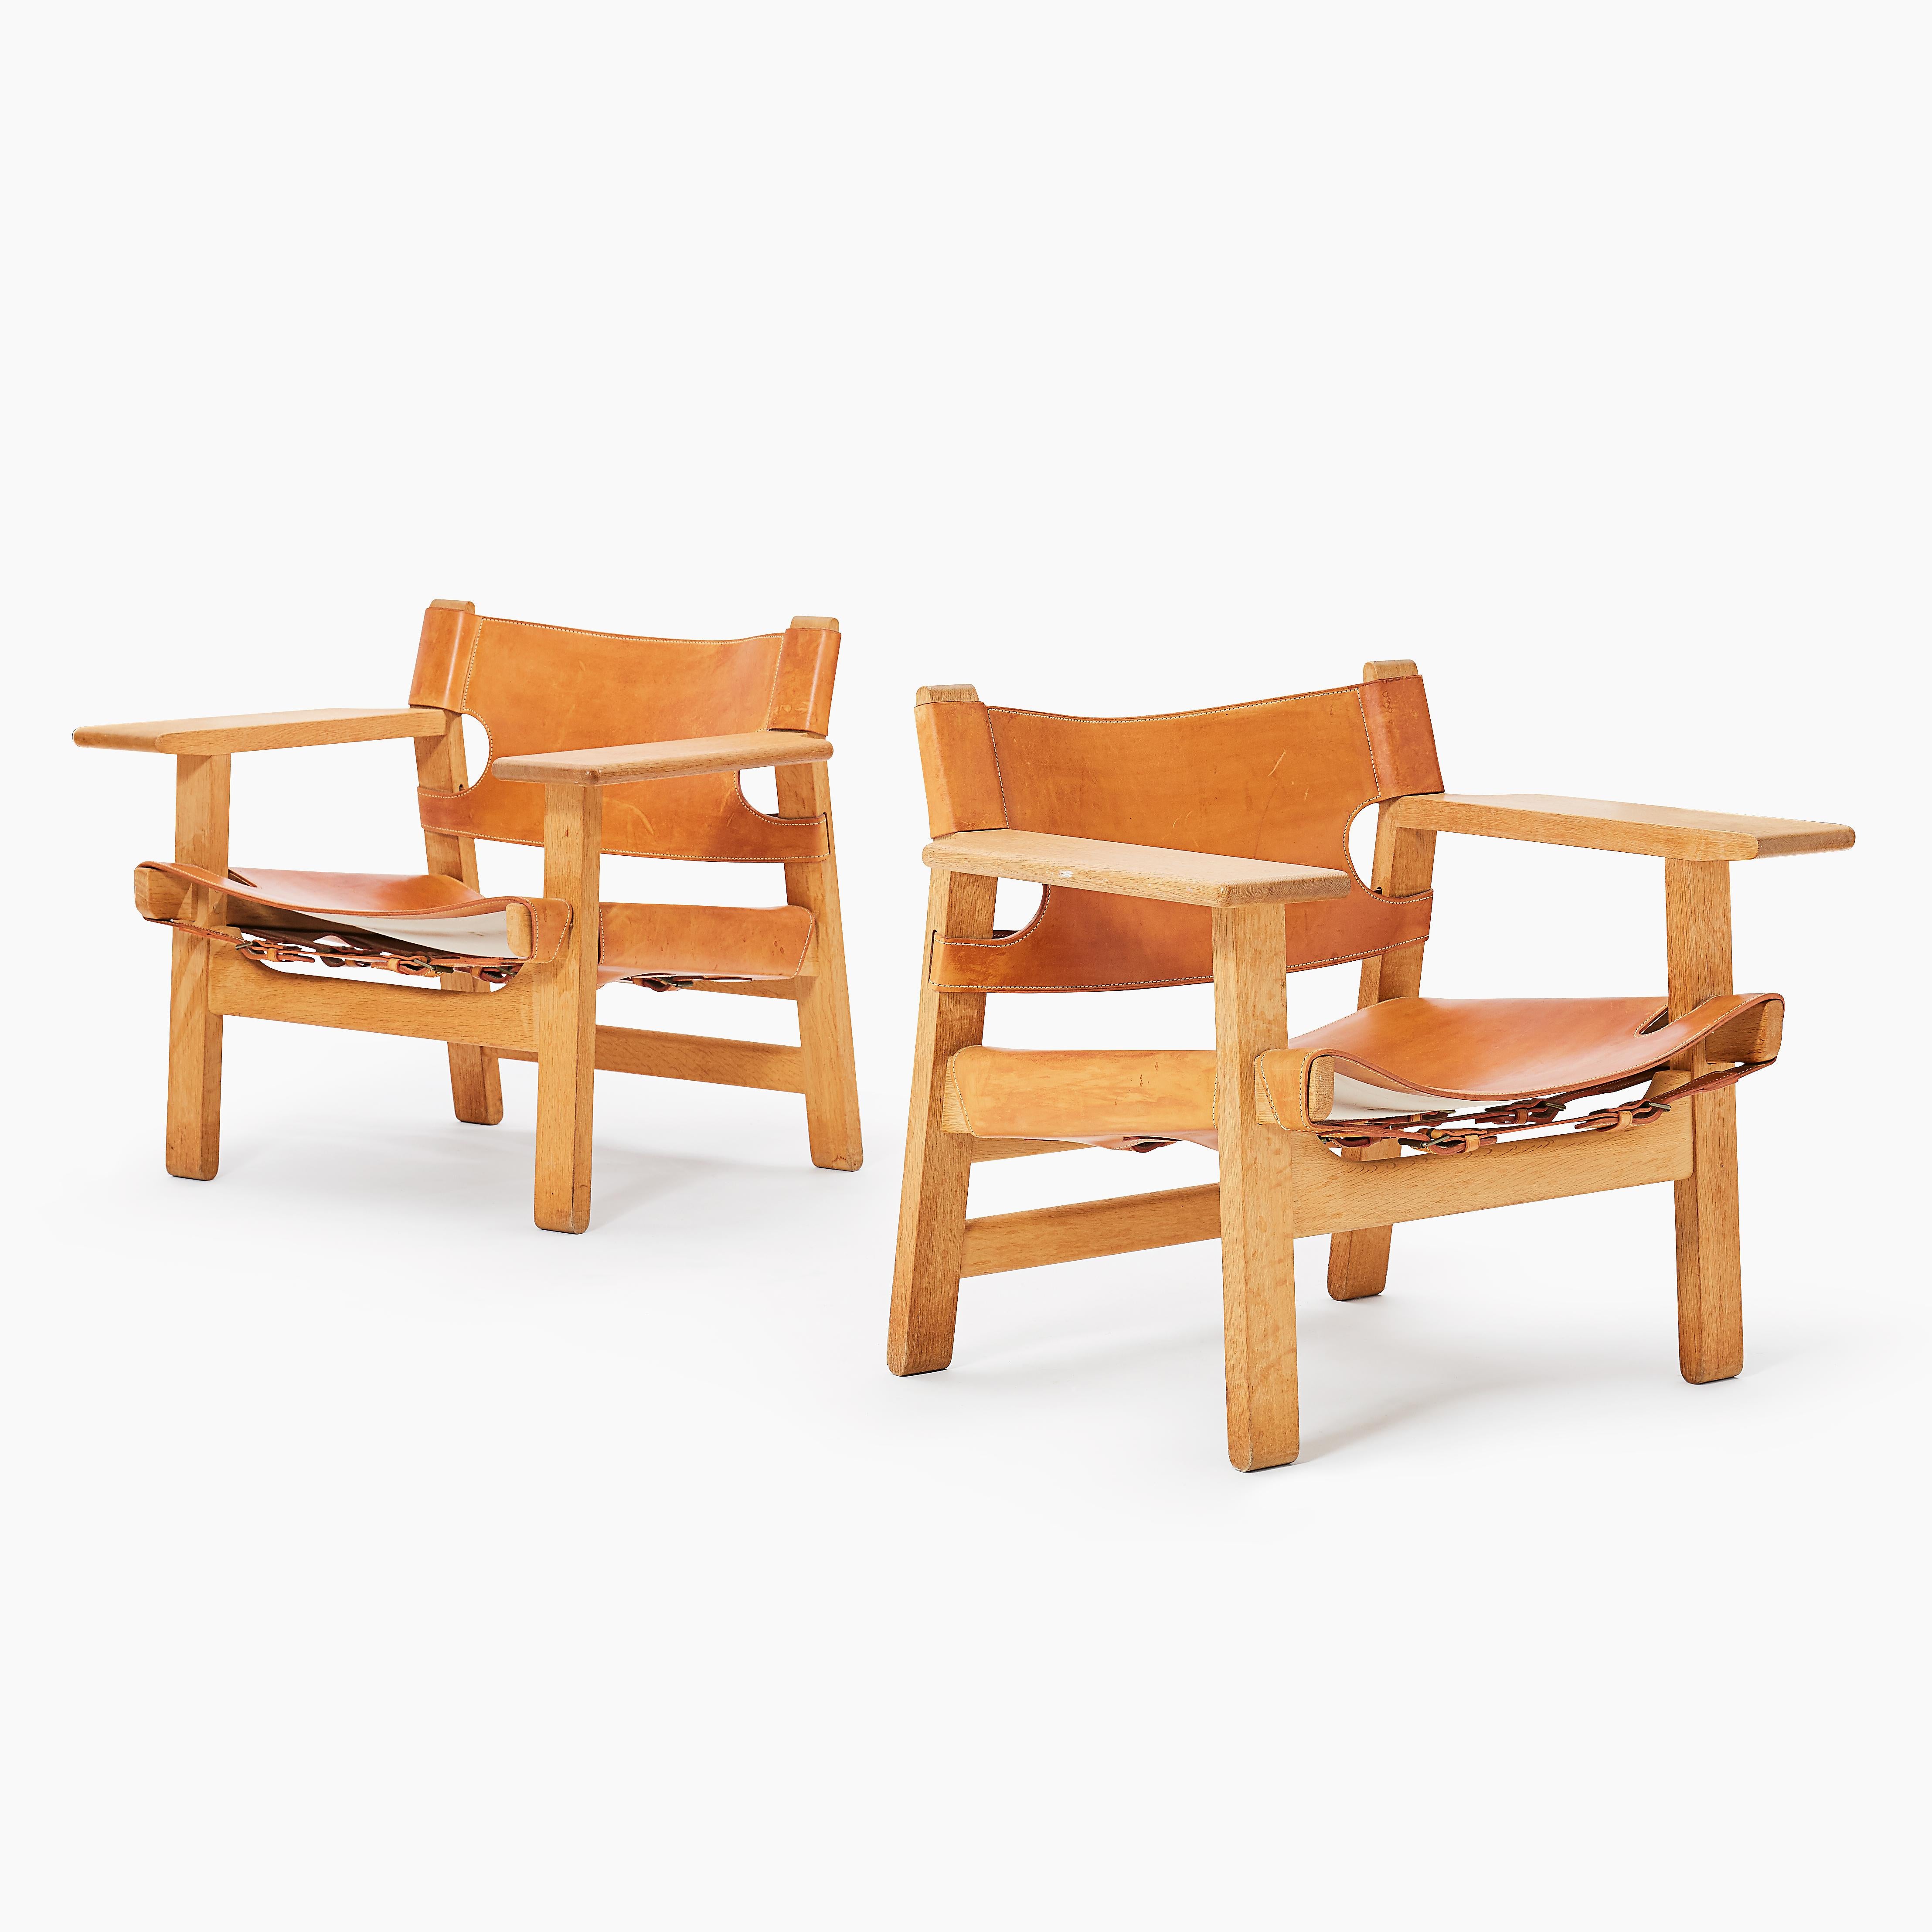 A lovely pair of early Spanish chairs, in solid oak and patinated cognac leather, designed by Børge Mogensen for Fredericia Stolefabrik, Denmark, in 1958.      Ships worldwide.





This item only ships to the US.